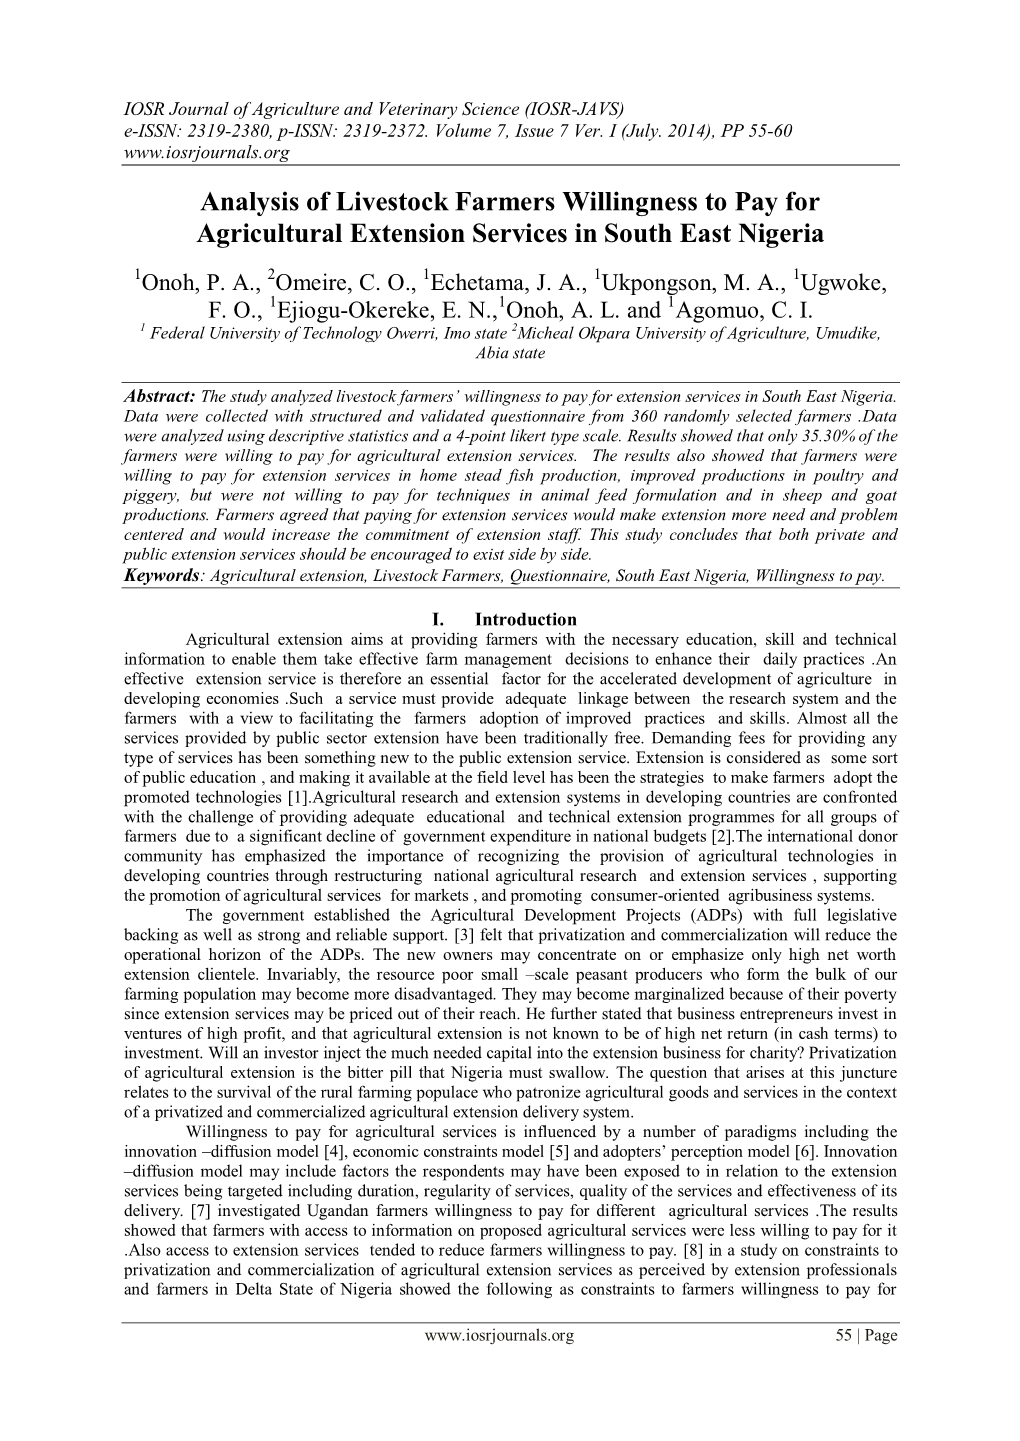 Analysis of Livestock Farmers Willingness to Pay for Agricultural Extension Services in South East Nigeria